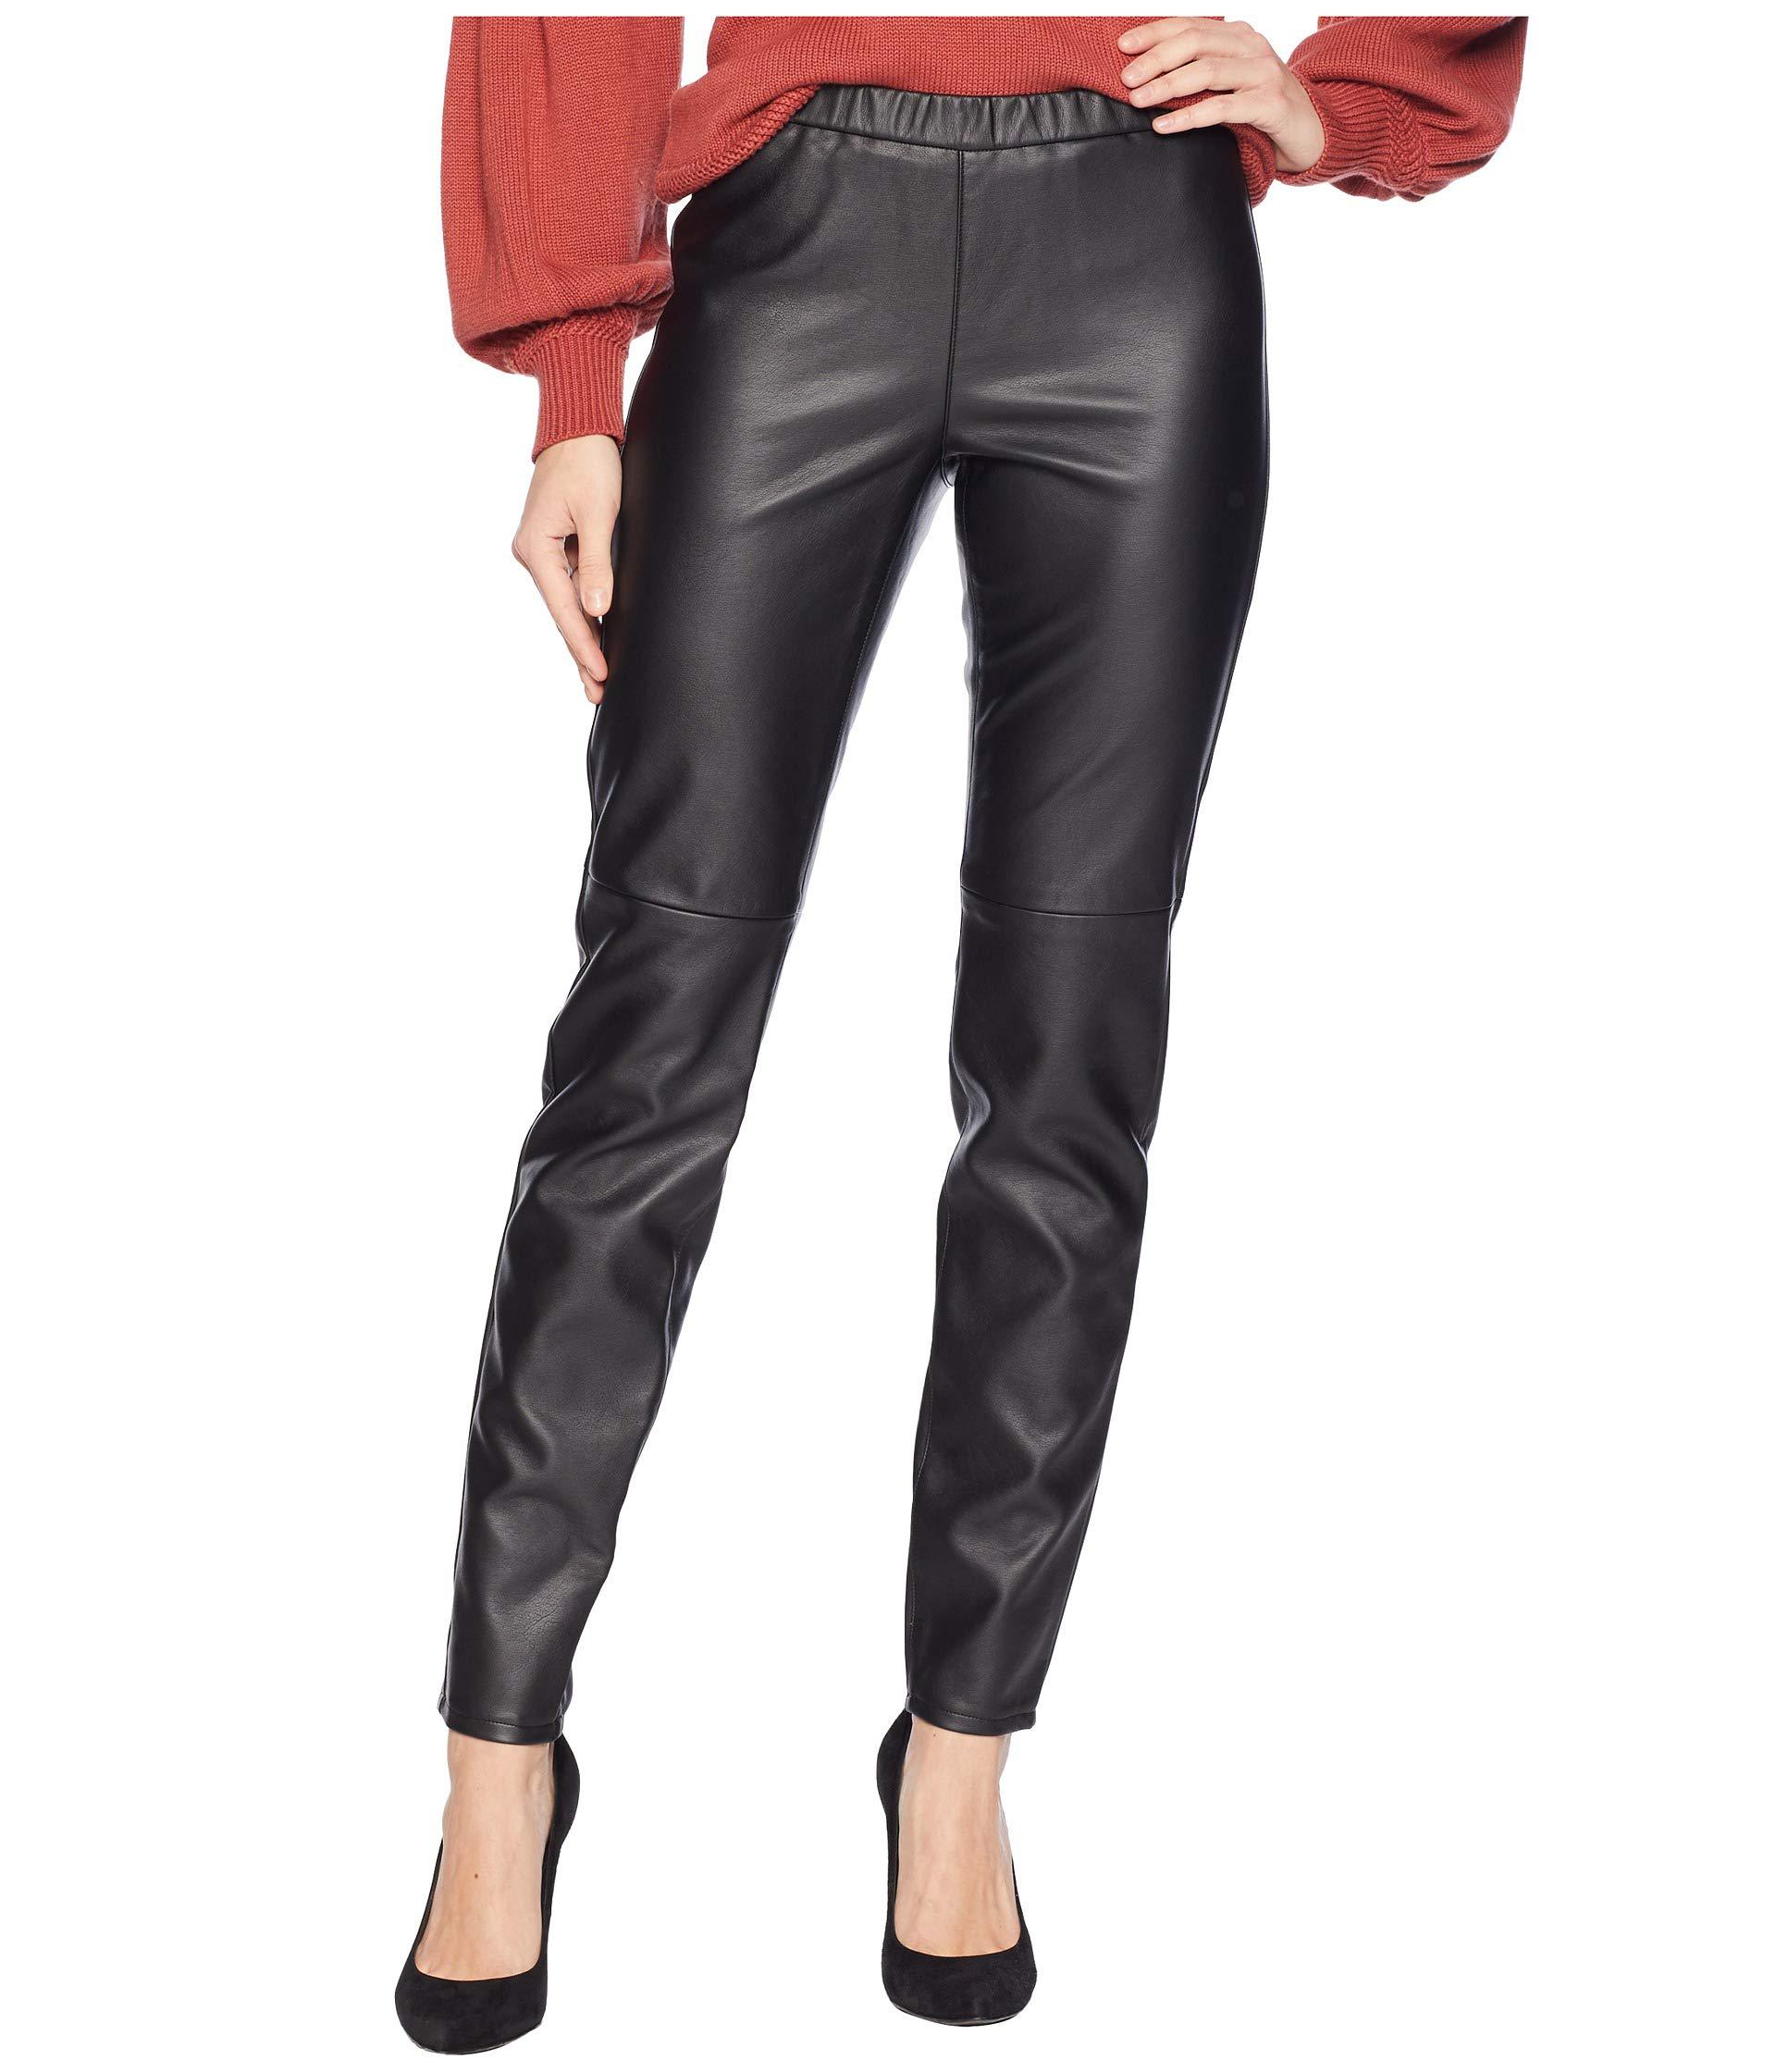 michael kors leather trousers